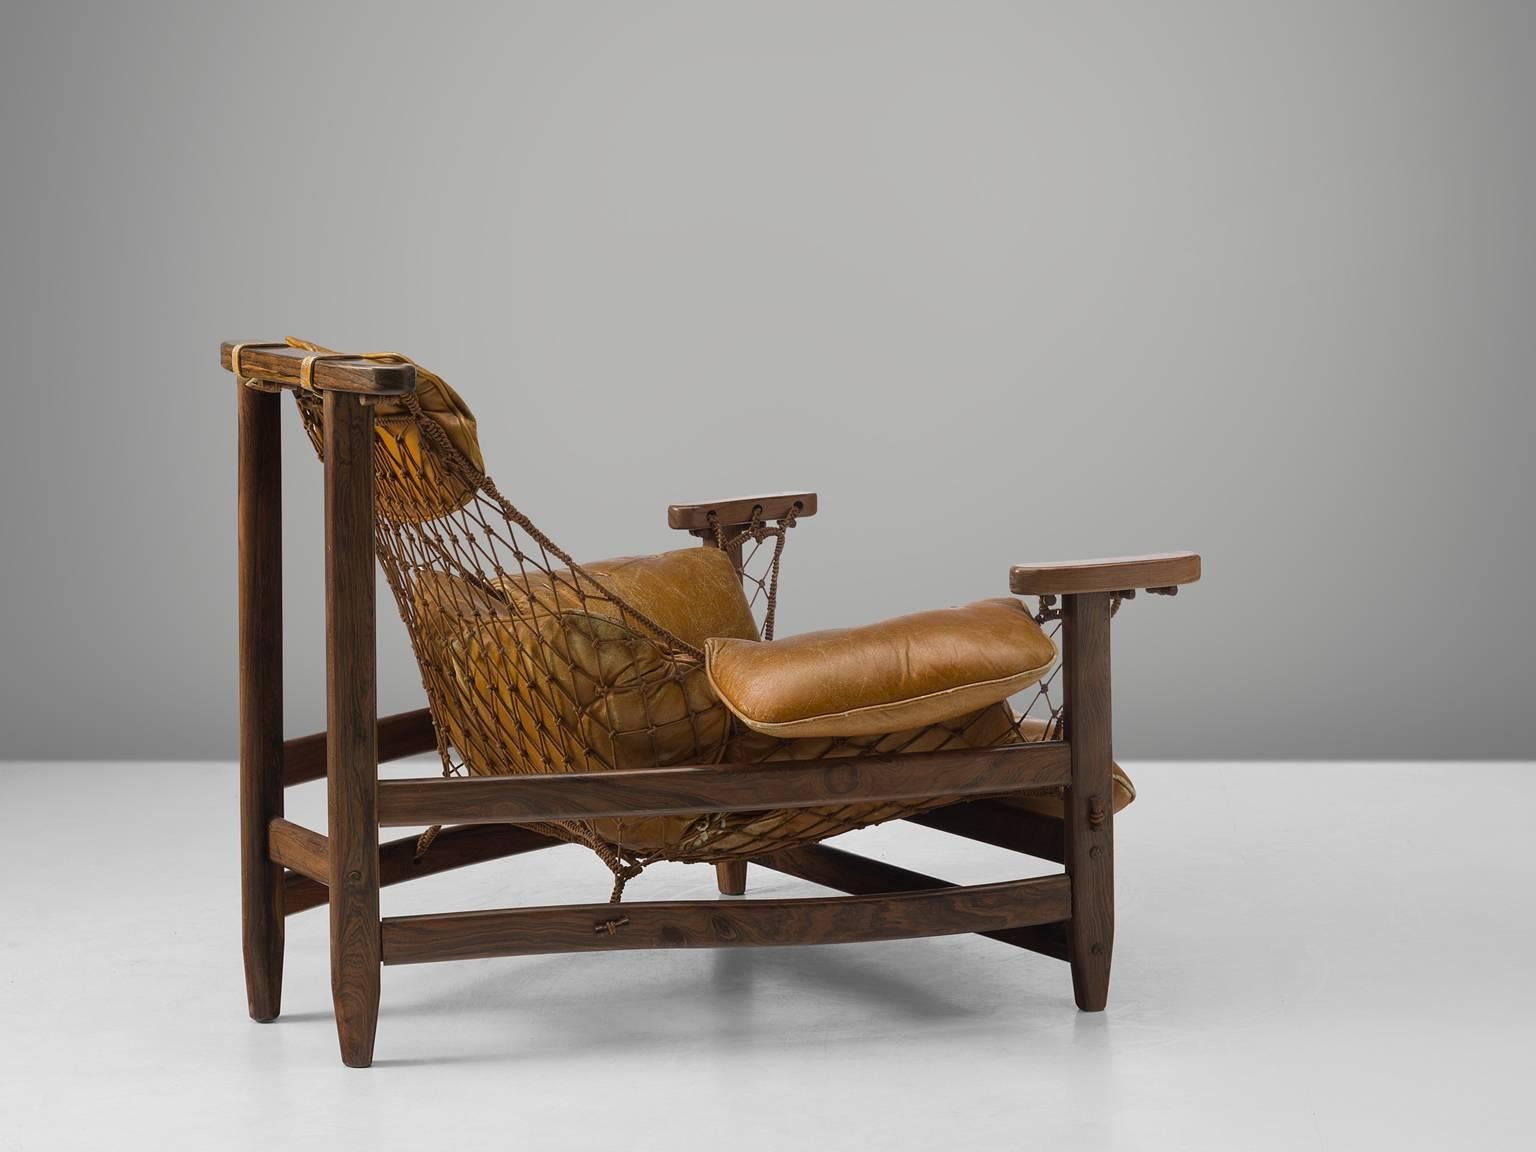 Jean Gillon, 'Jangada' armchair and ottoman, rosewood, nylon rope, original leather, Brazil, 1968.

This robust and hefty armchair is designed by Jean Gillon. The originality of this Janganda comes from the concept of the body being captured by